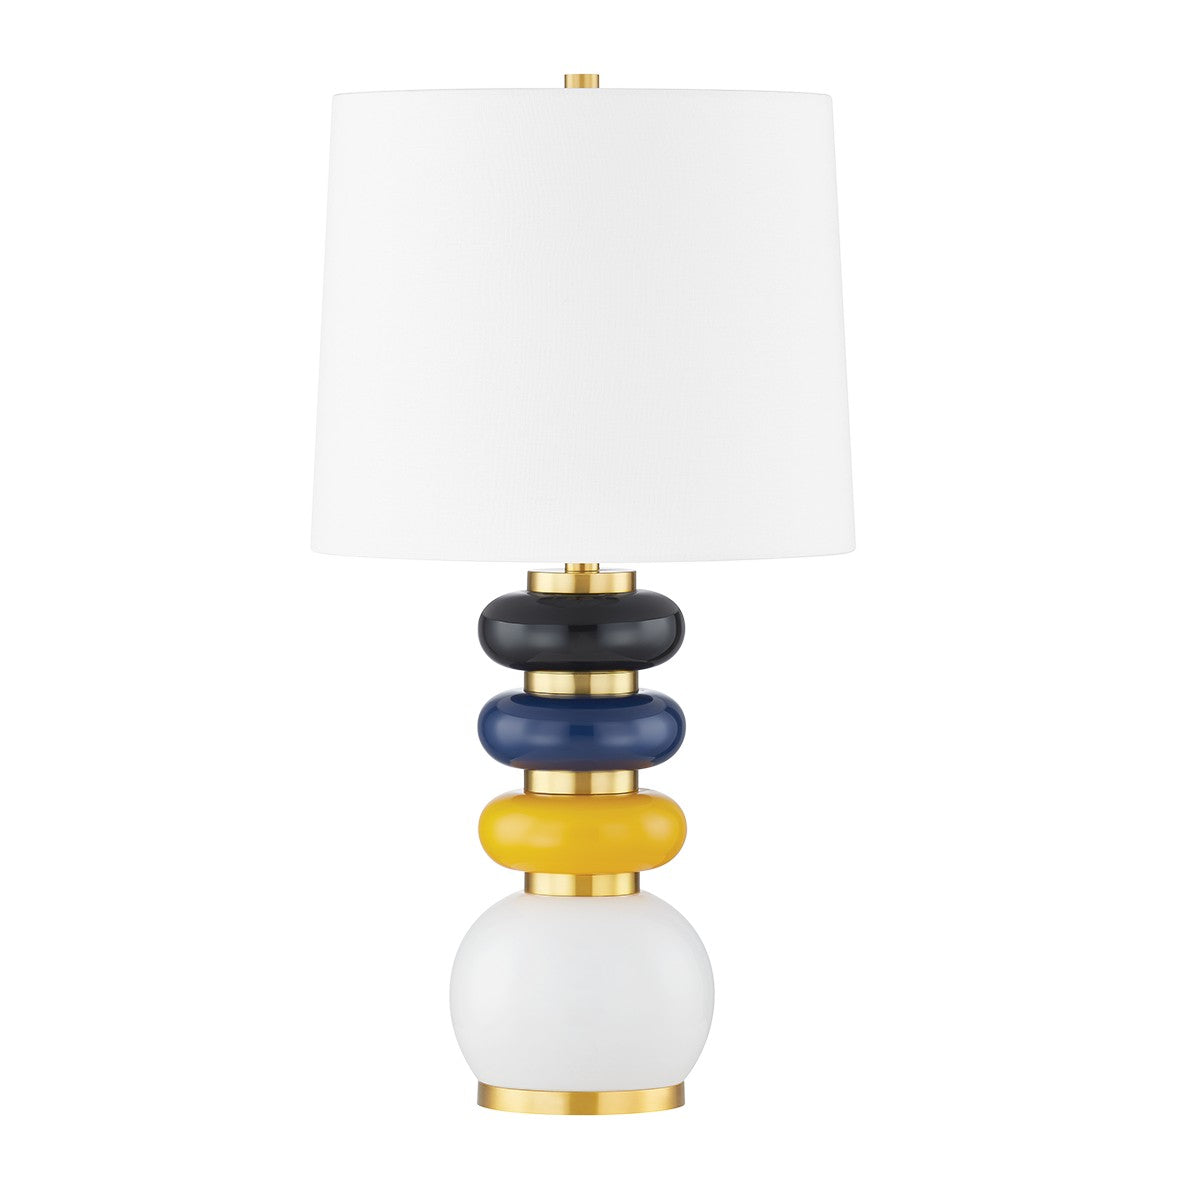 Mitzi - HL820201-AGB/CMM - One Light Table Lamp - Robyn - Aged Brass